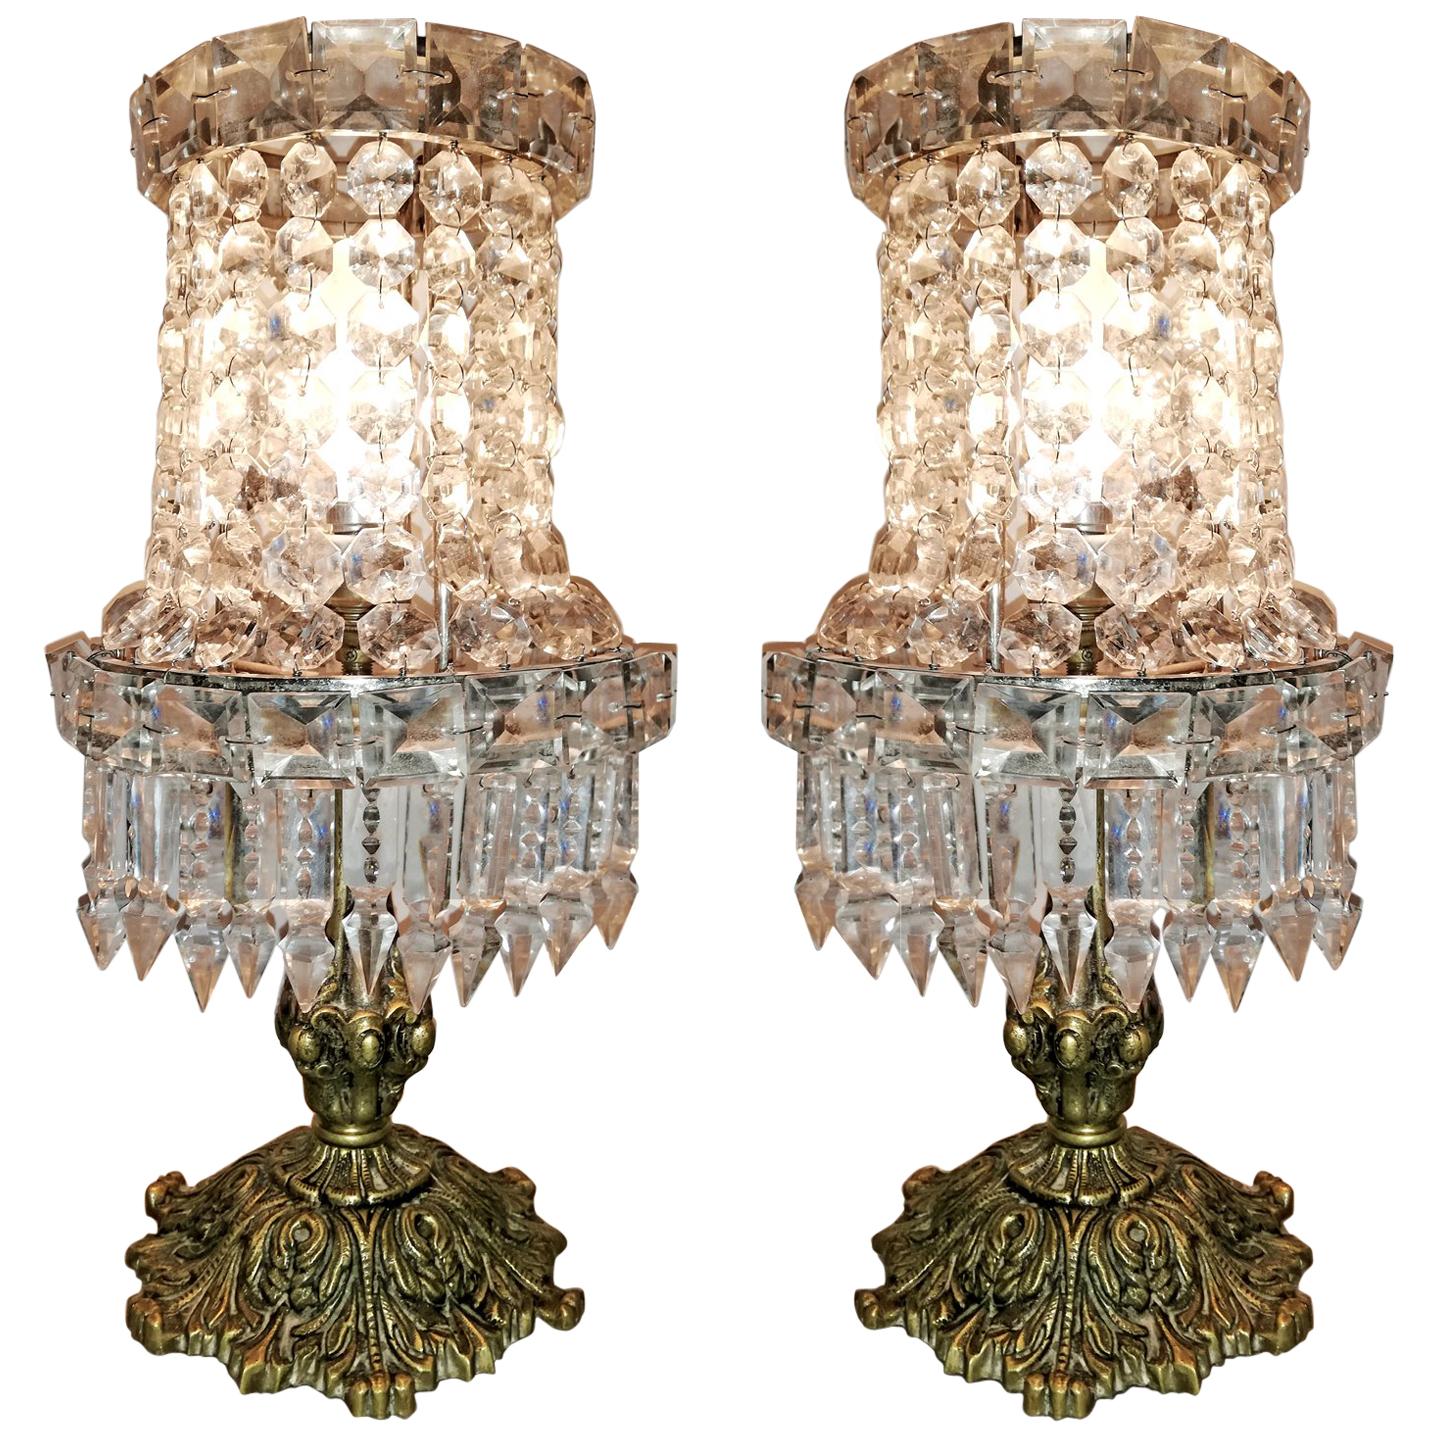 Pair of French Regency Empire in bronze and crystal table lamps
Housing one-light bulb each E14. Bronze detailing with all crystal intact.
Measures:
Height 15 in /36 cm
Diameter 7 in /18 cm
Weight: 17 lb. / 8 kg
Two light bulbs ( E14 )
Good working